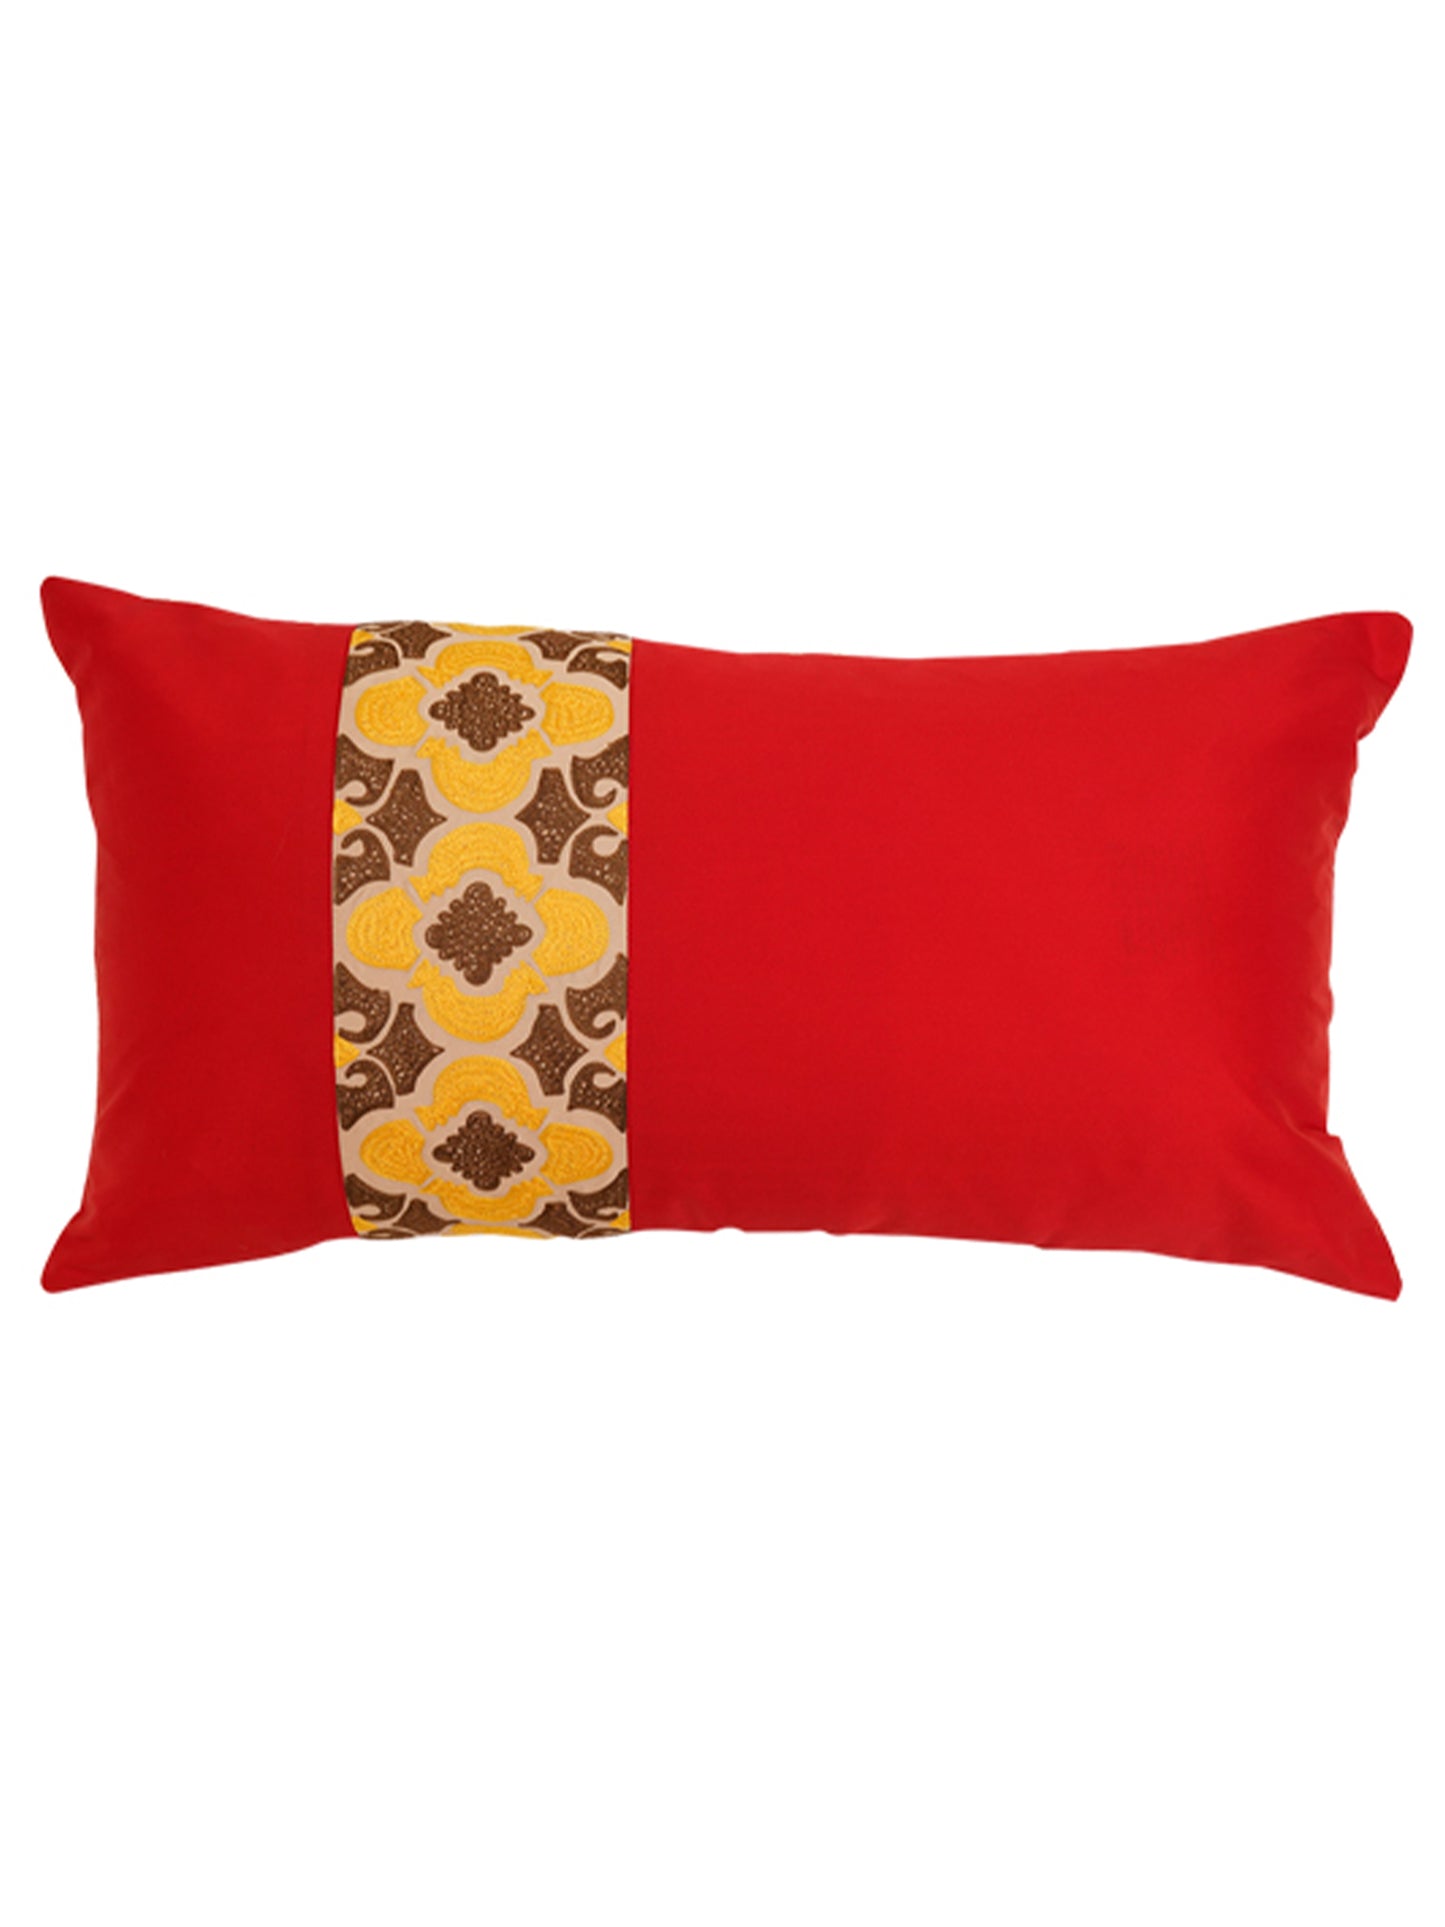 Co-ordinated Cushion Cover Set Of 5 Polyester Printed & Technique Multi Color -20x20+16x16+12x22inches